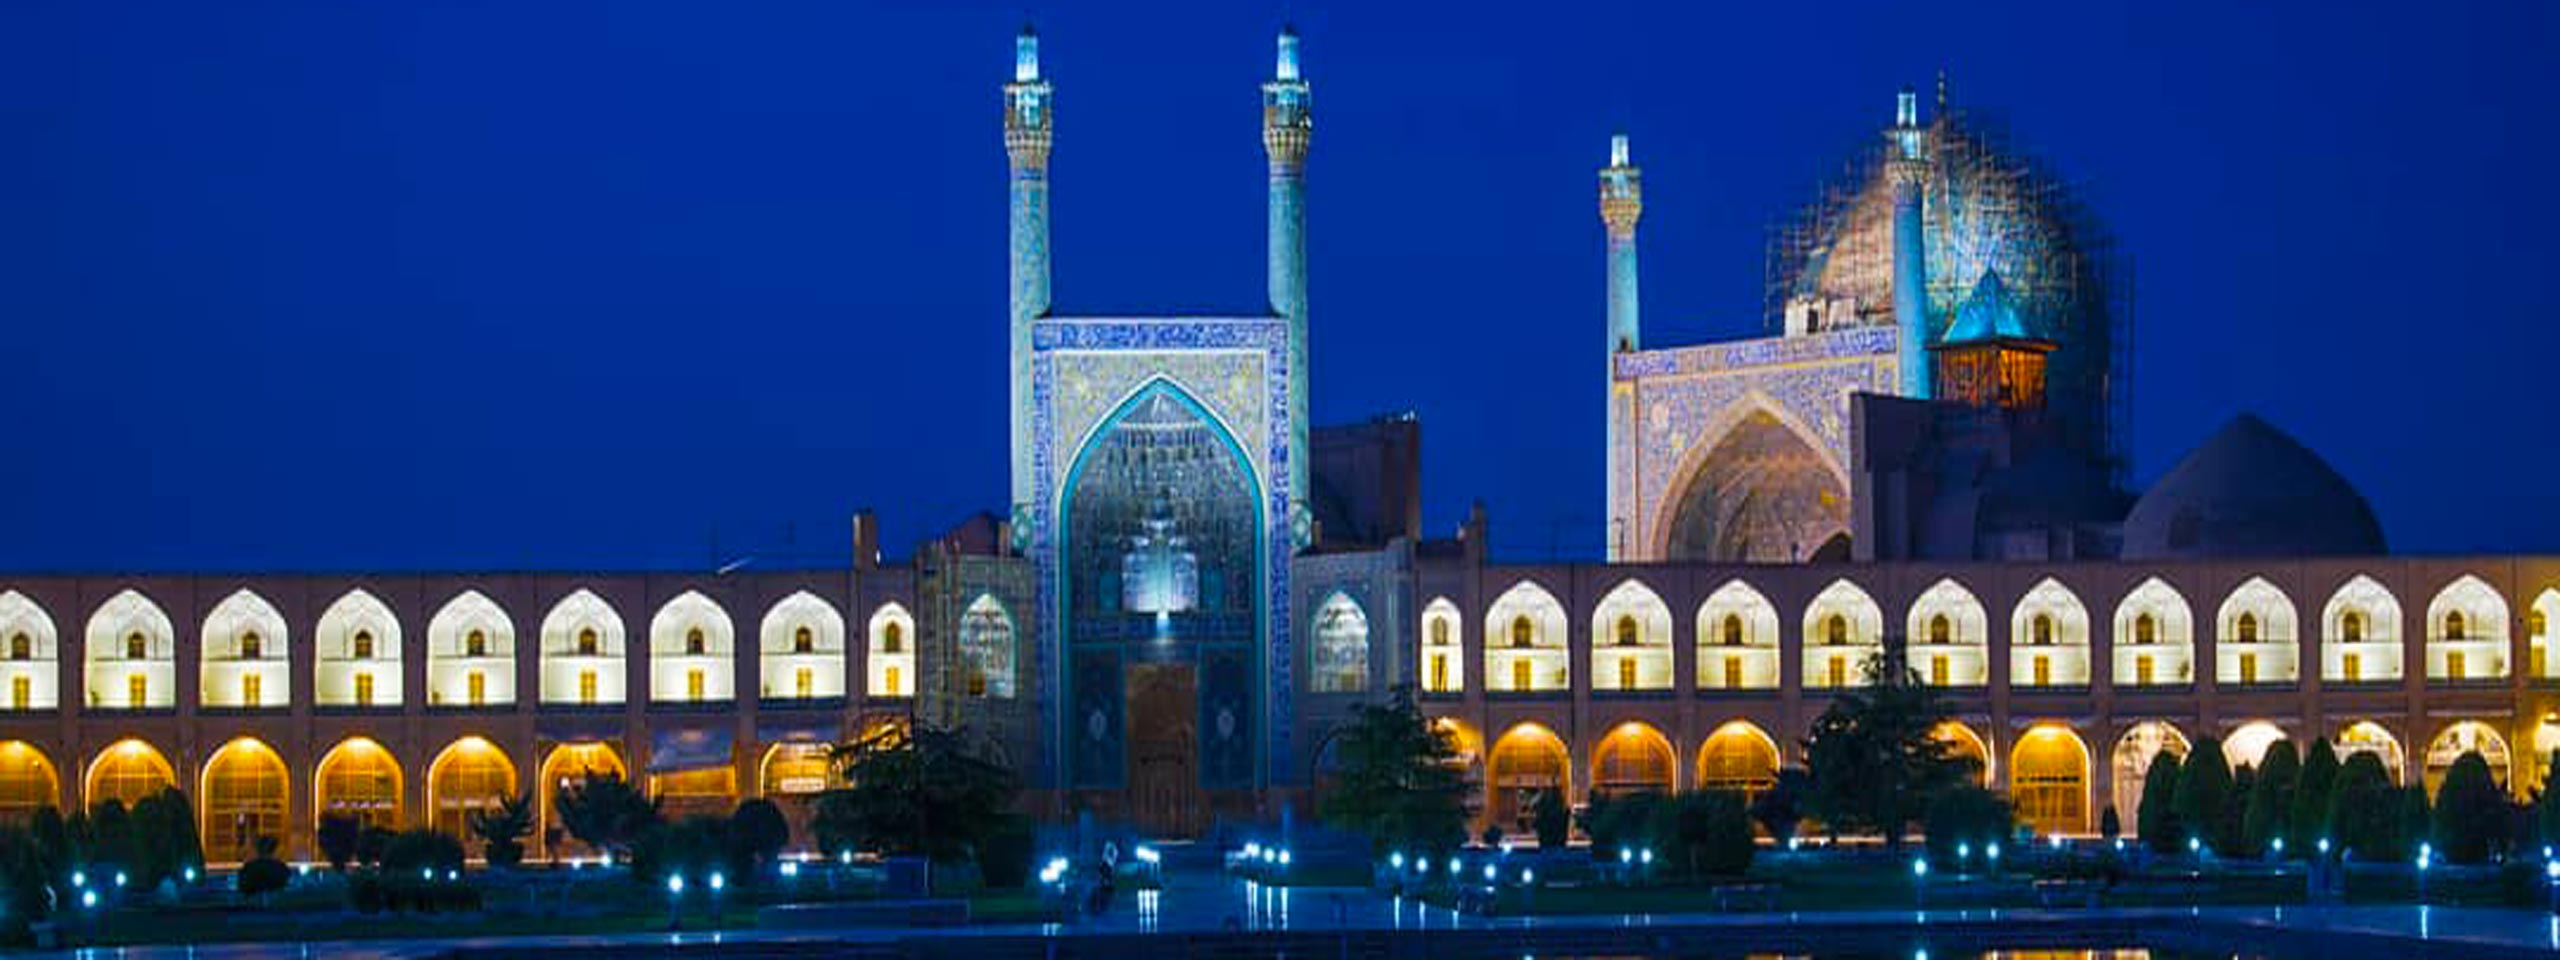 Shah Mosque or Imam mosque in Isfahan